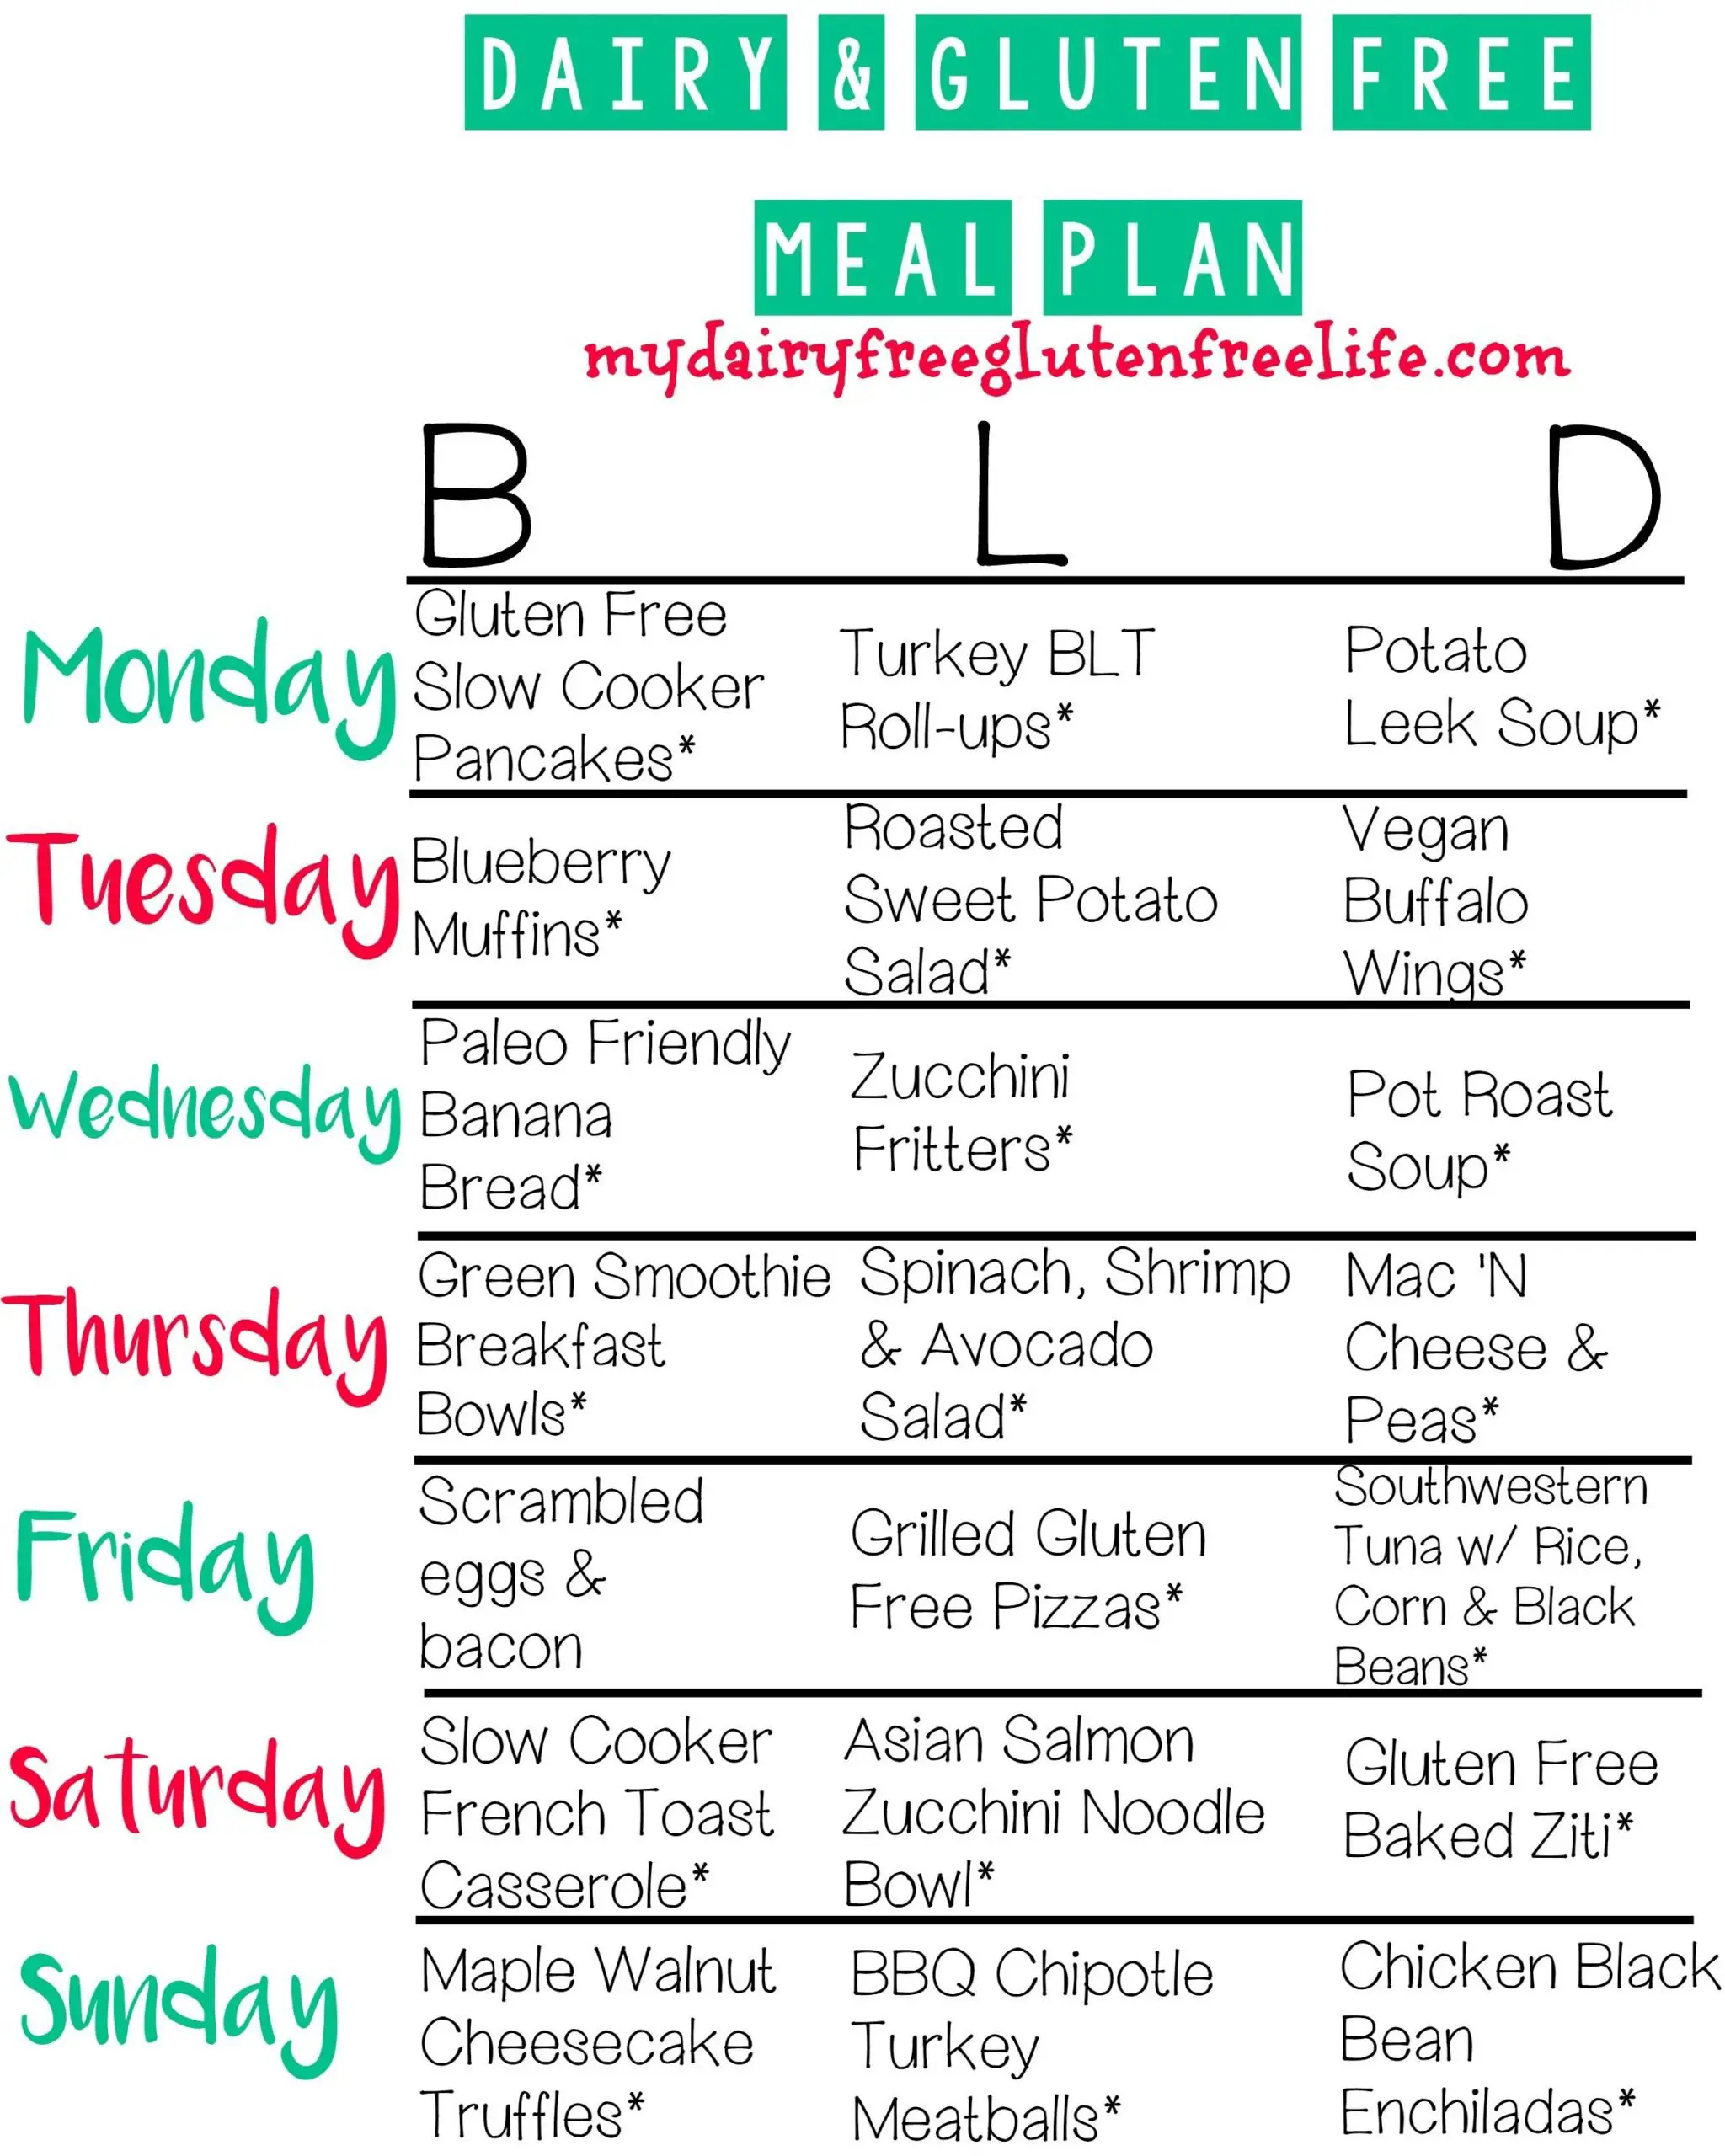 7 Day Dairy &  Gluten Free Meal Plan with Recipes!